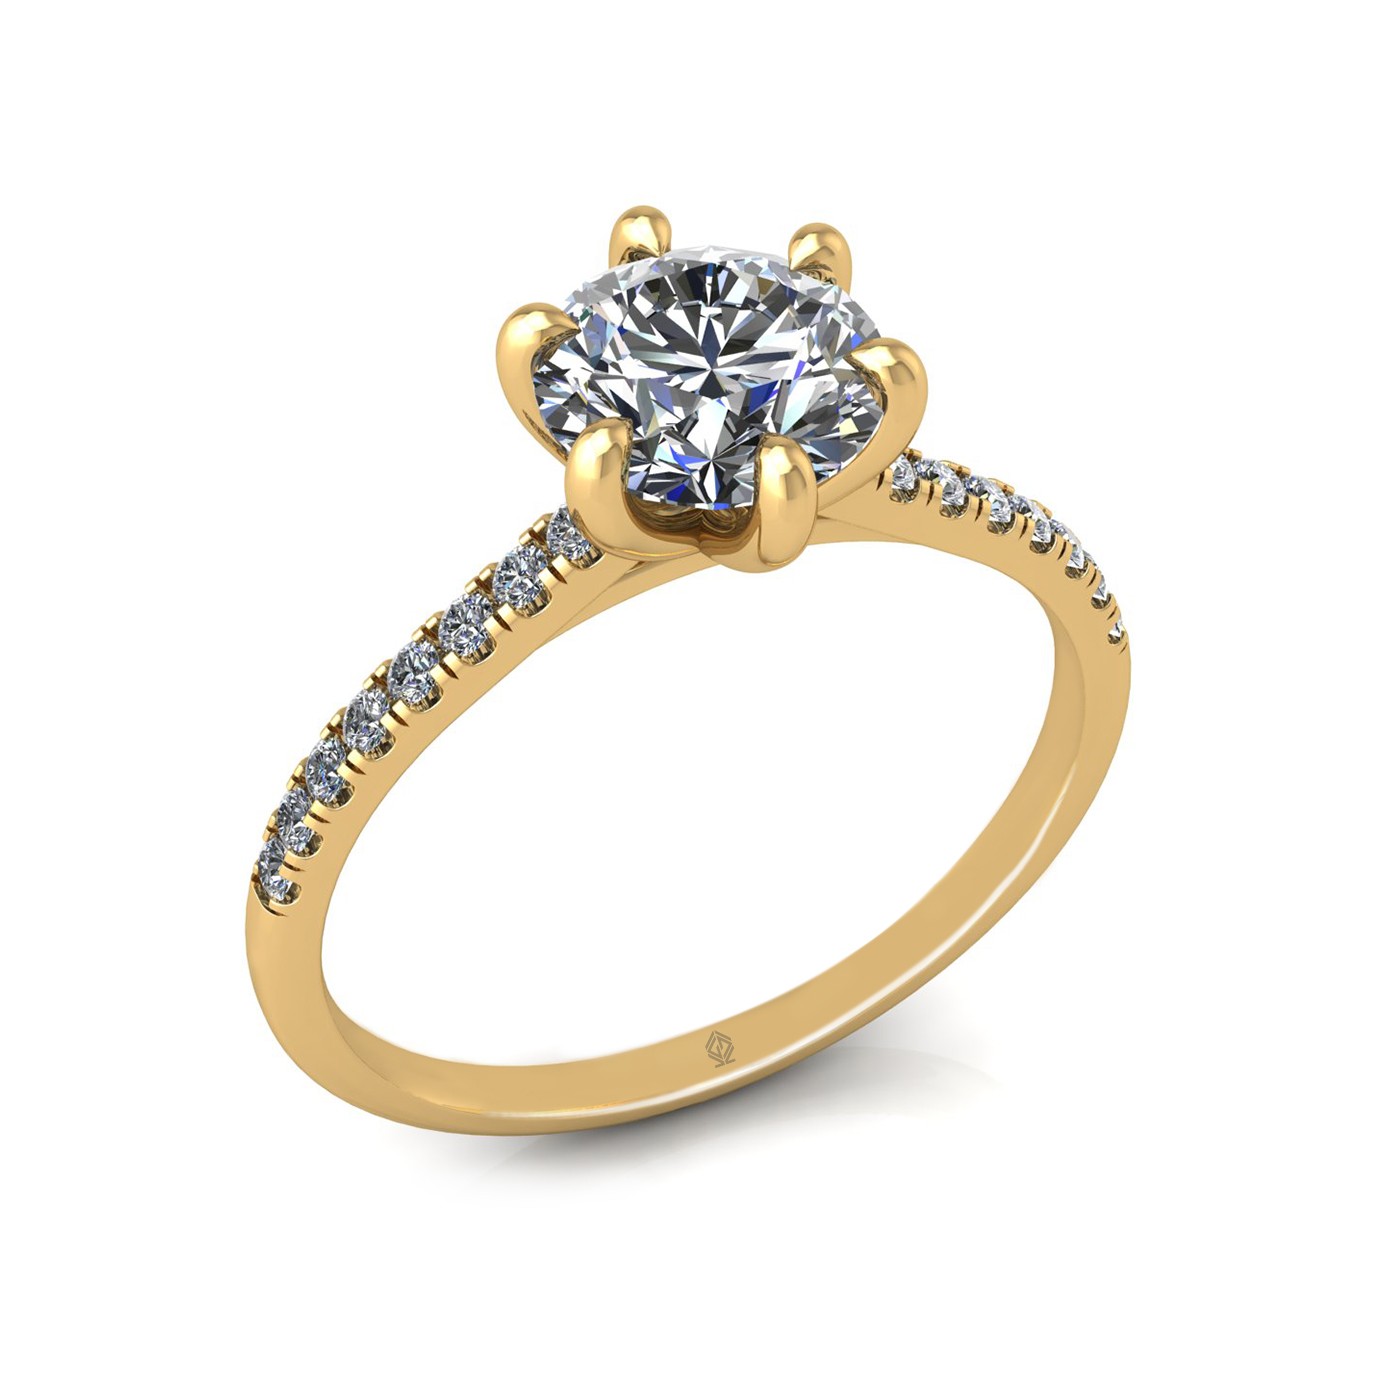 18k yellow gold 1,00 ct 6 prongs round cut diamond engagement ring with whisper thin pavÉ set band